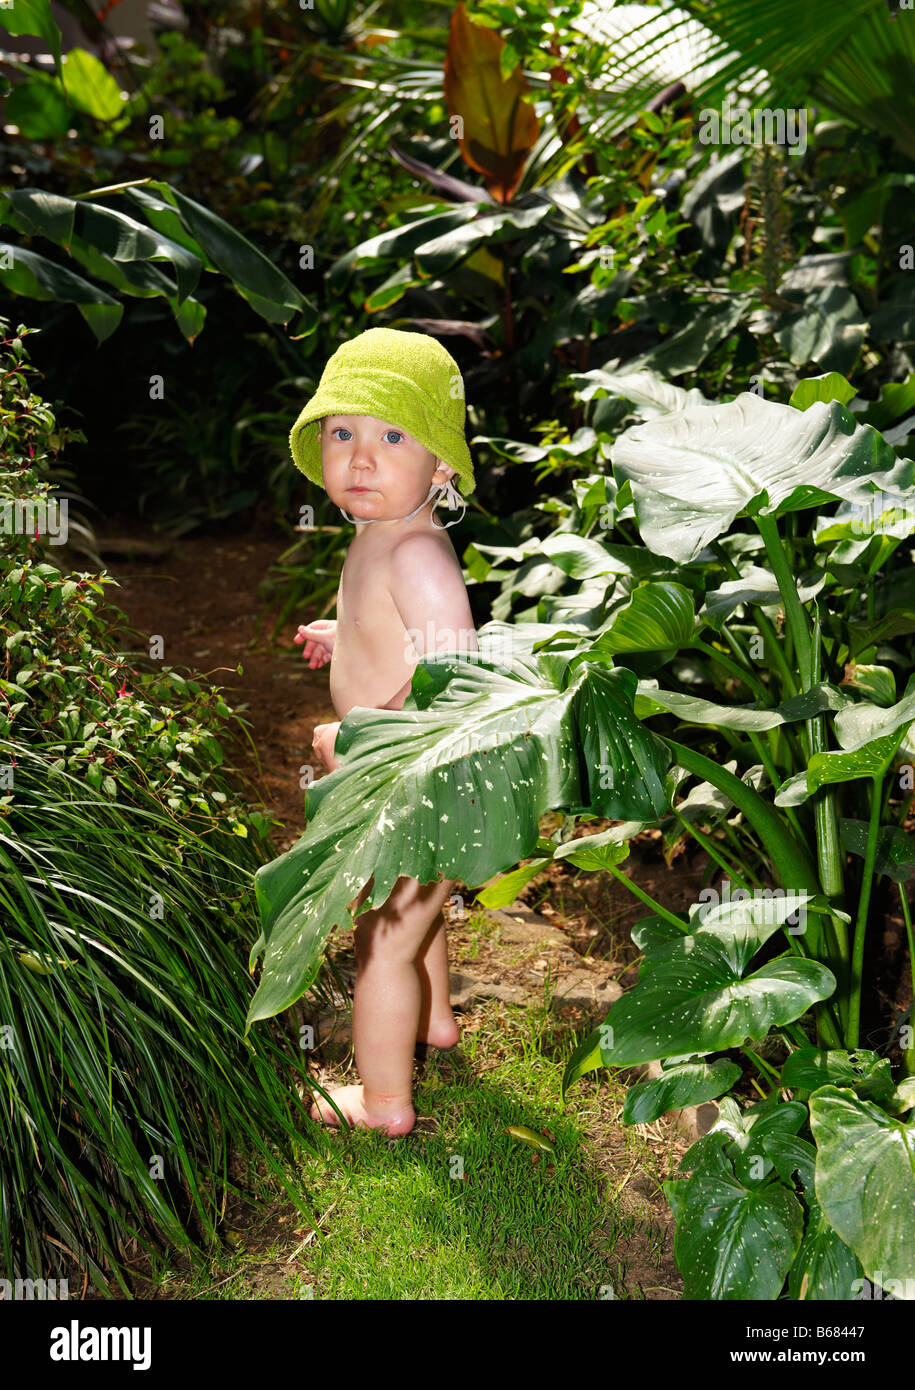 Little boy standing in jungle of plants Stock Photo